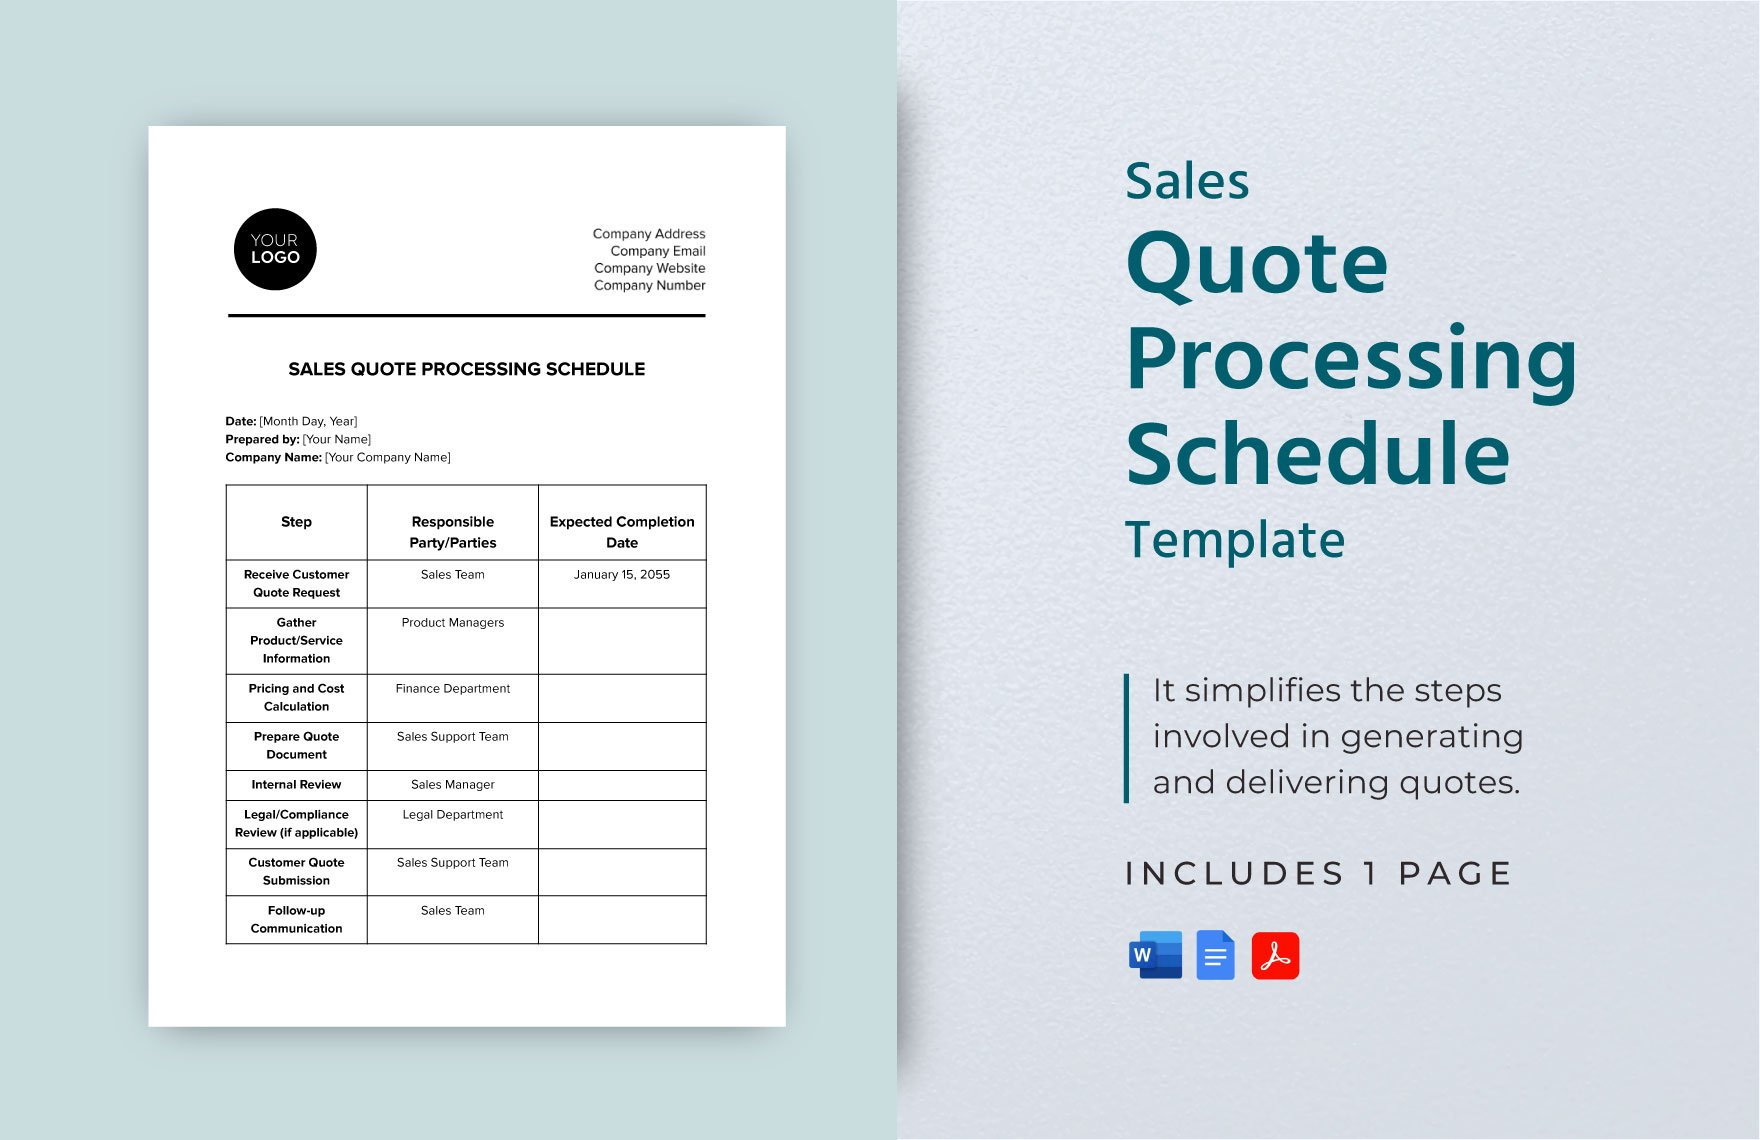 Sales Quote Processing Schedule Template